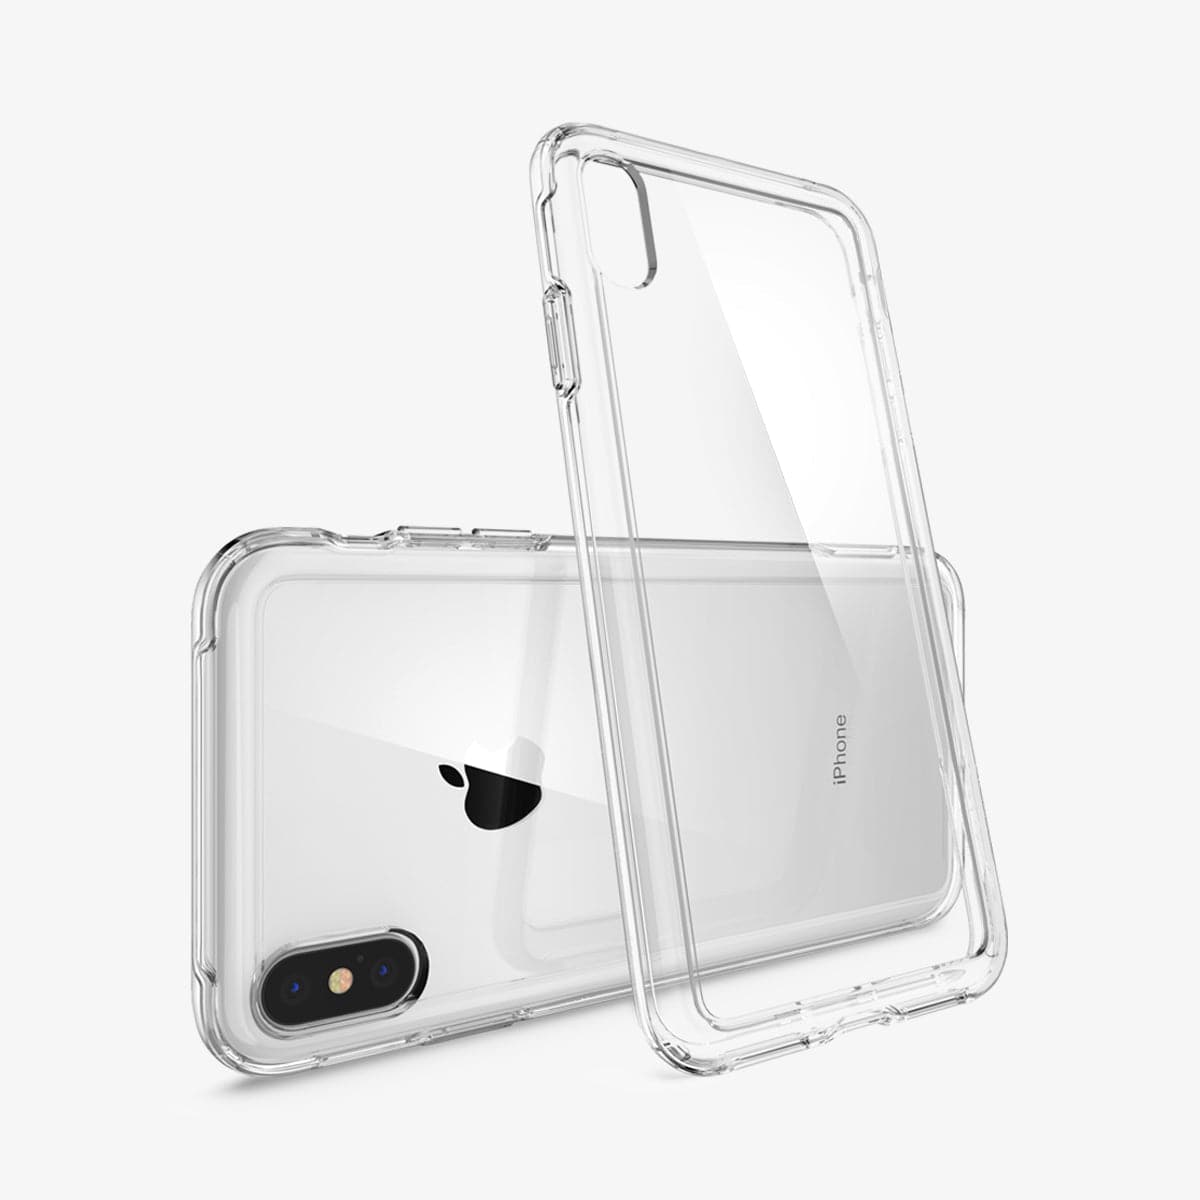 065CS24548 - iPhone XS Max Case Slim Armor Crystal in crystal clear showing the back, side and inside